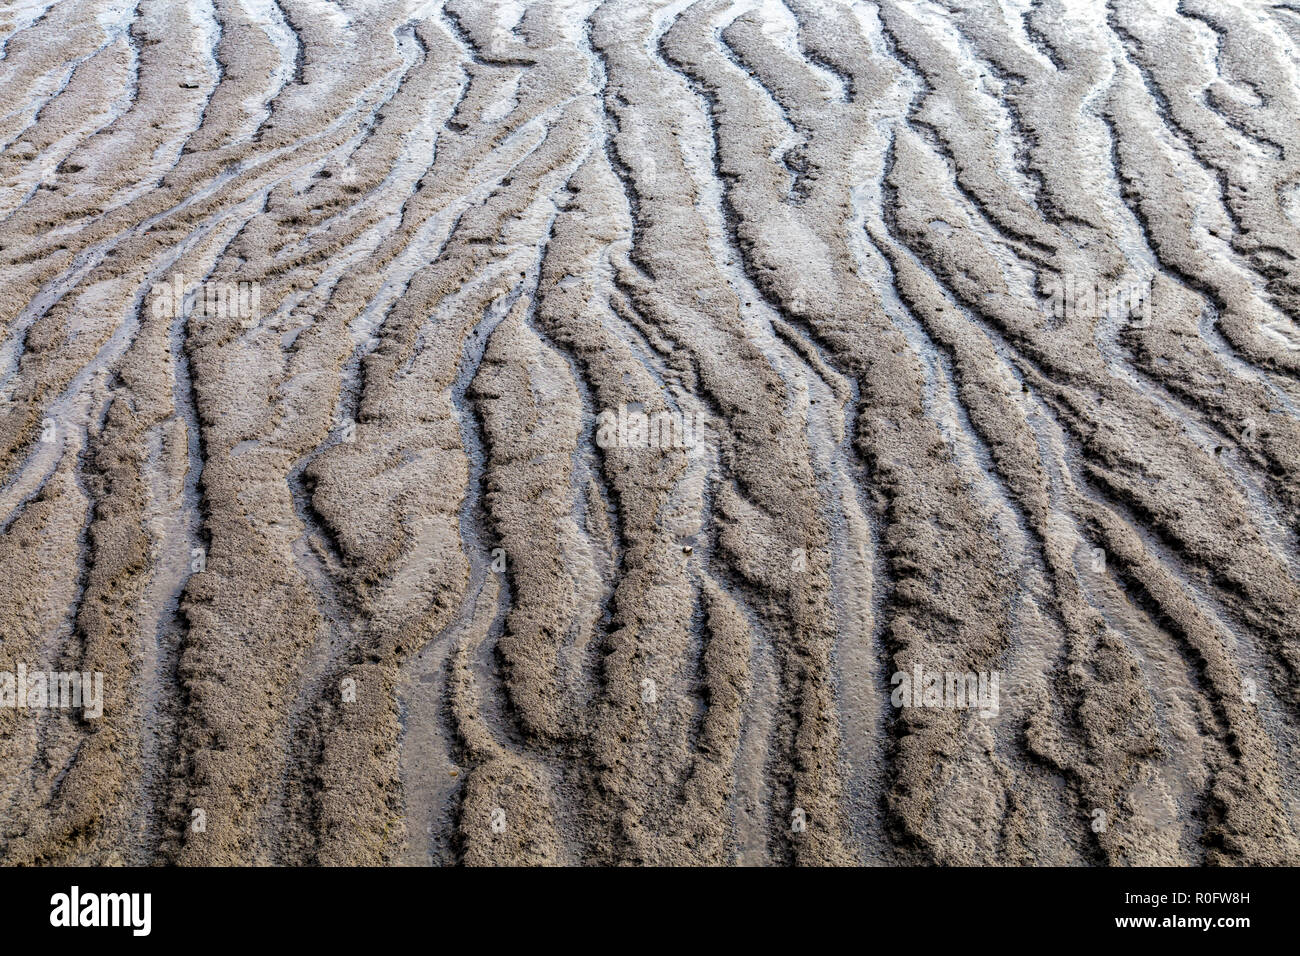 Exposed riverbed during a low tide, river Thames, London, UK Stock Photo